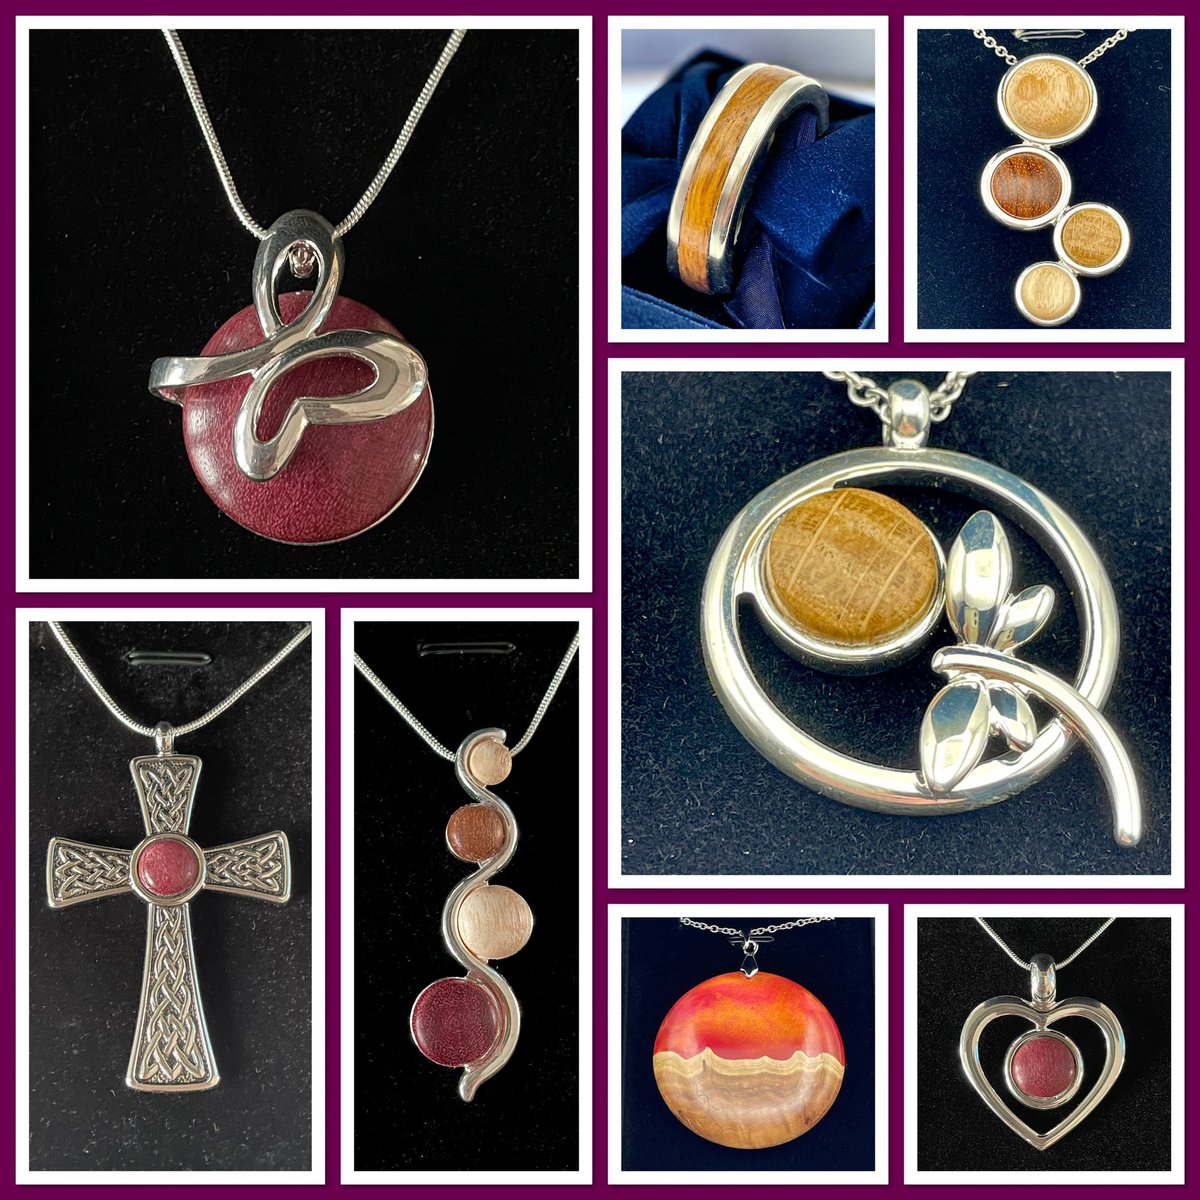 Whether you’re looking for a unique #giftidea or just want to treat yourself, our pendants & rings are all #handmade for the beautiful bespoke solution 💖

davenportshandmade.co.uk/product-catego…

#UKGiftHour #UKGiftAM #jewellery